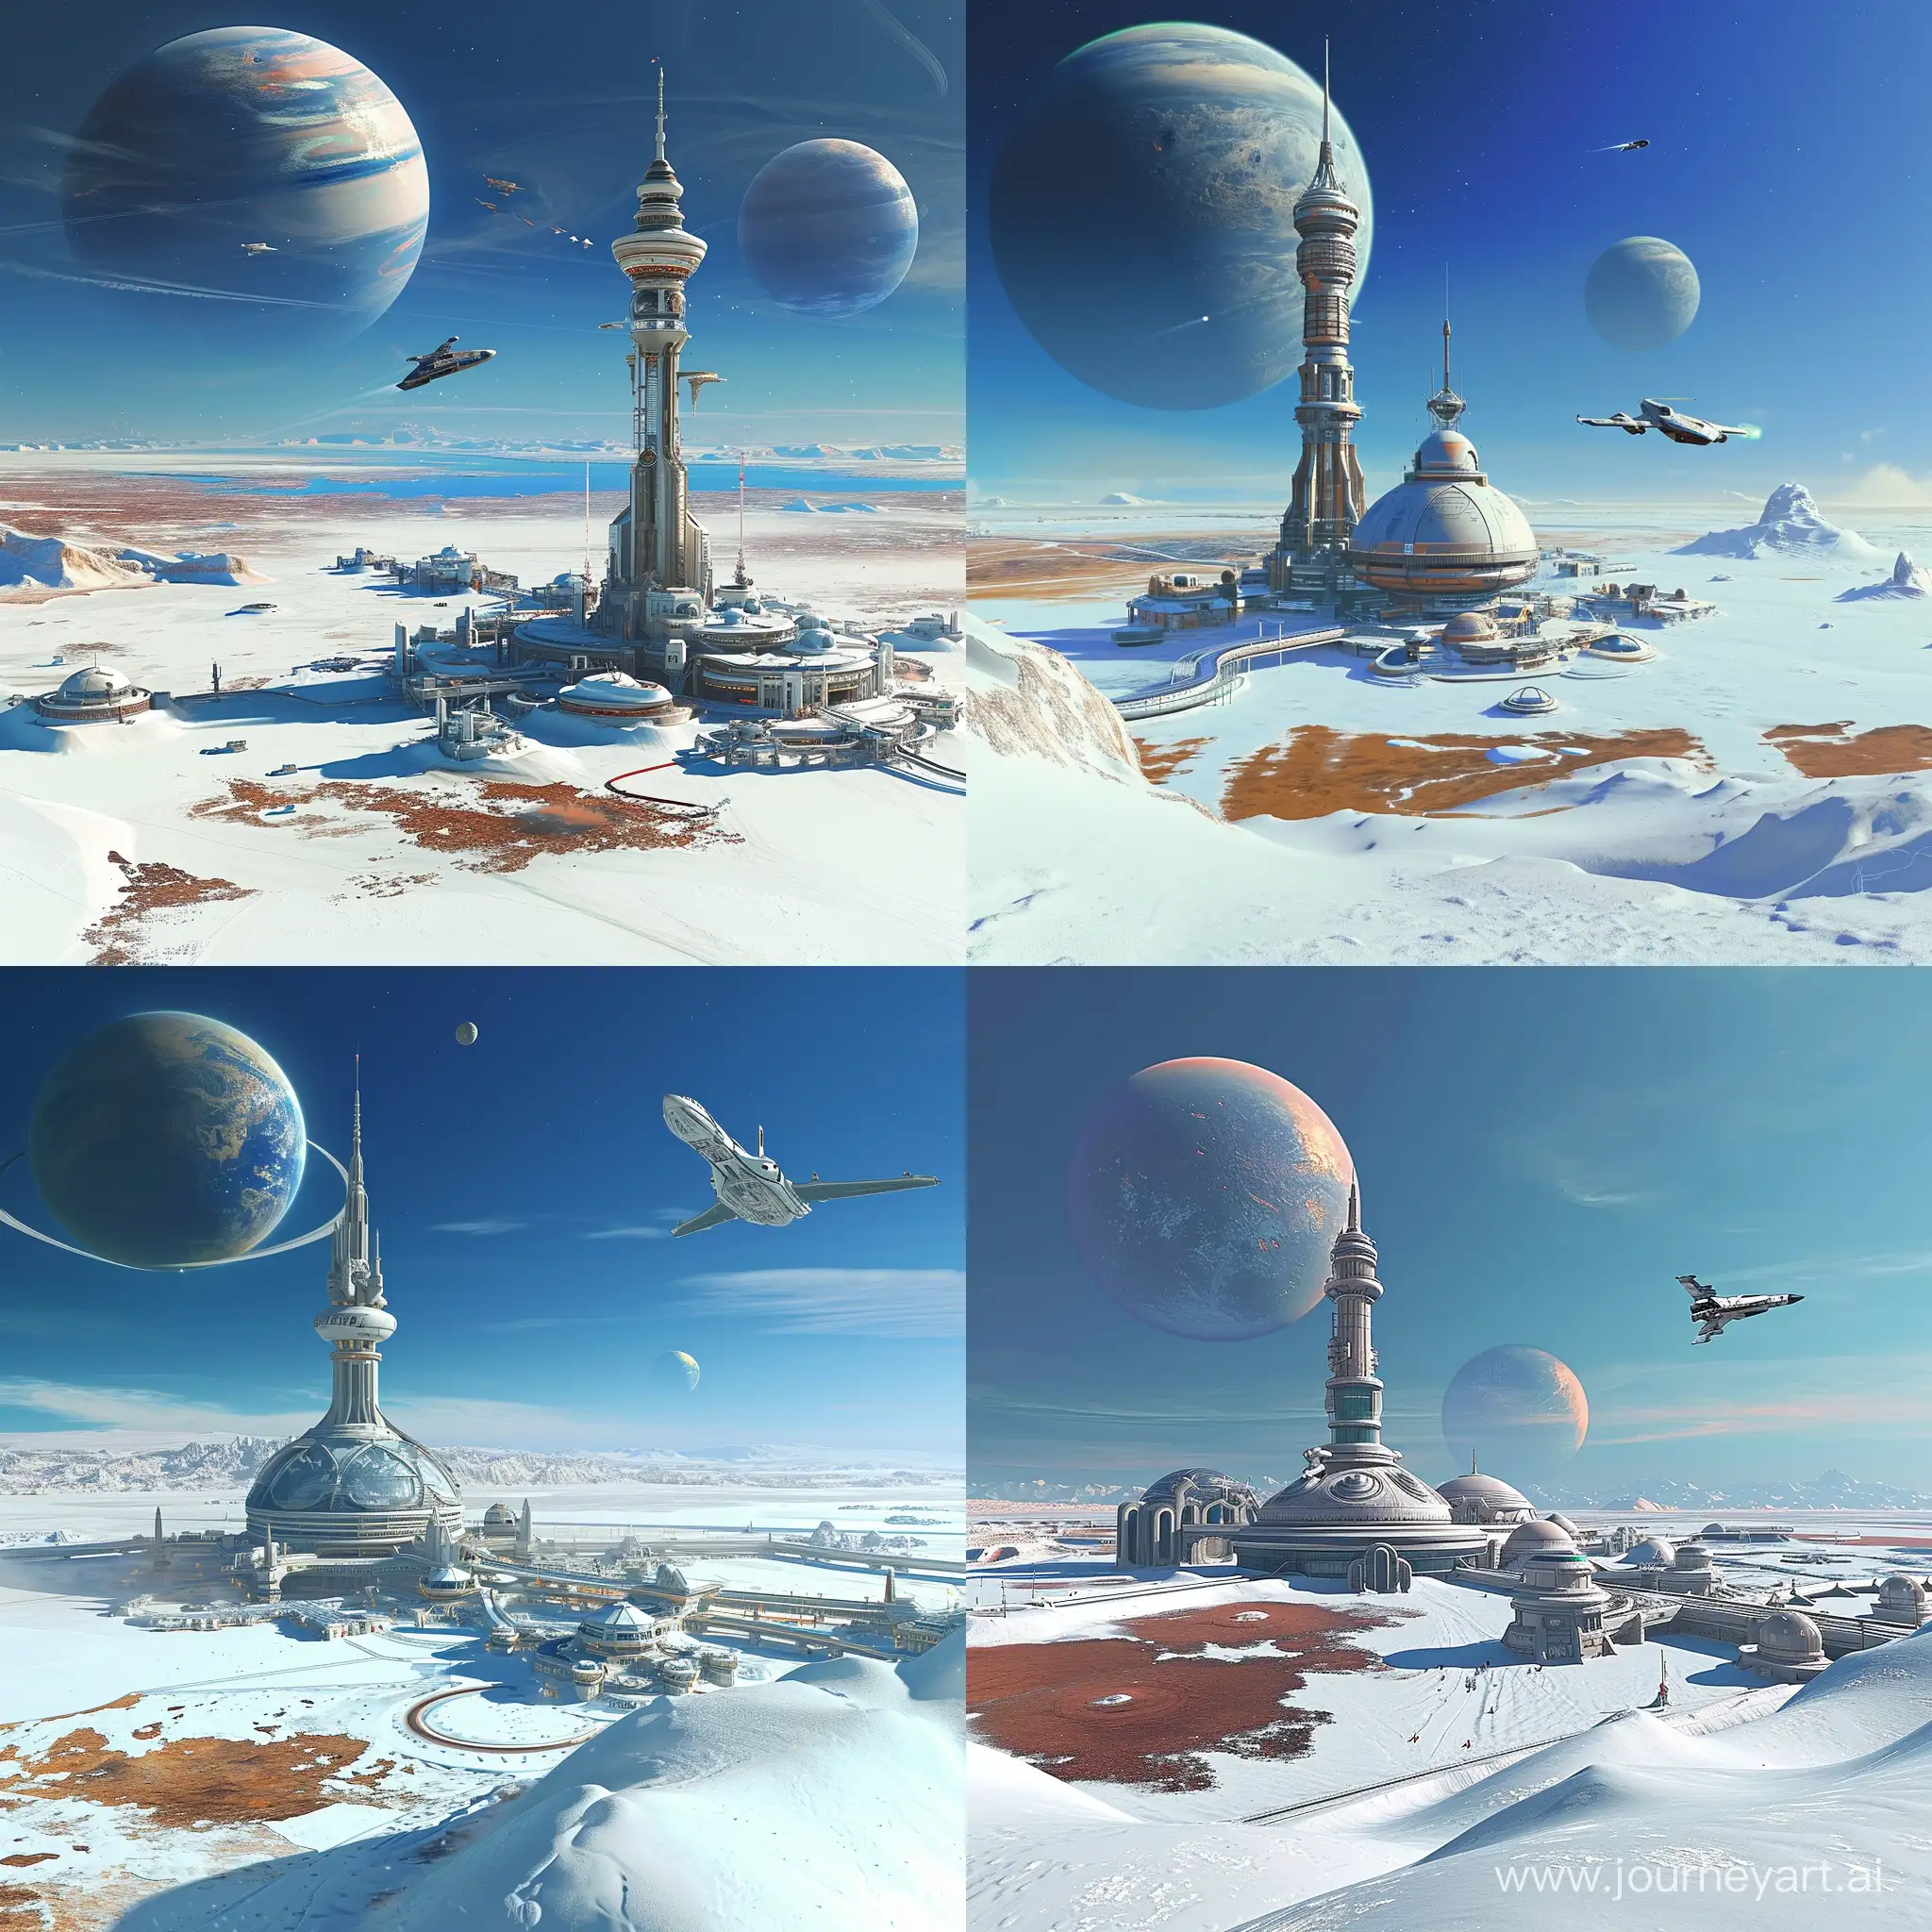 there is a space station located on a planet with a white snowy surface. The station features a circular dome and a tall tower with a spire on top. The sky is blue and there are two planets visible in the background. A spaceship is visible in the sky, flying towards the station. The planet's surface is covered in white snow and there are patches of brown land visible. The station is surrounded by a few buildings some of which are connected by walkways. The whole scene is visually striking and imaginative. --v 6